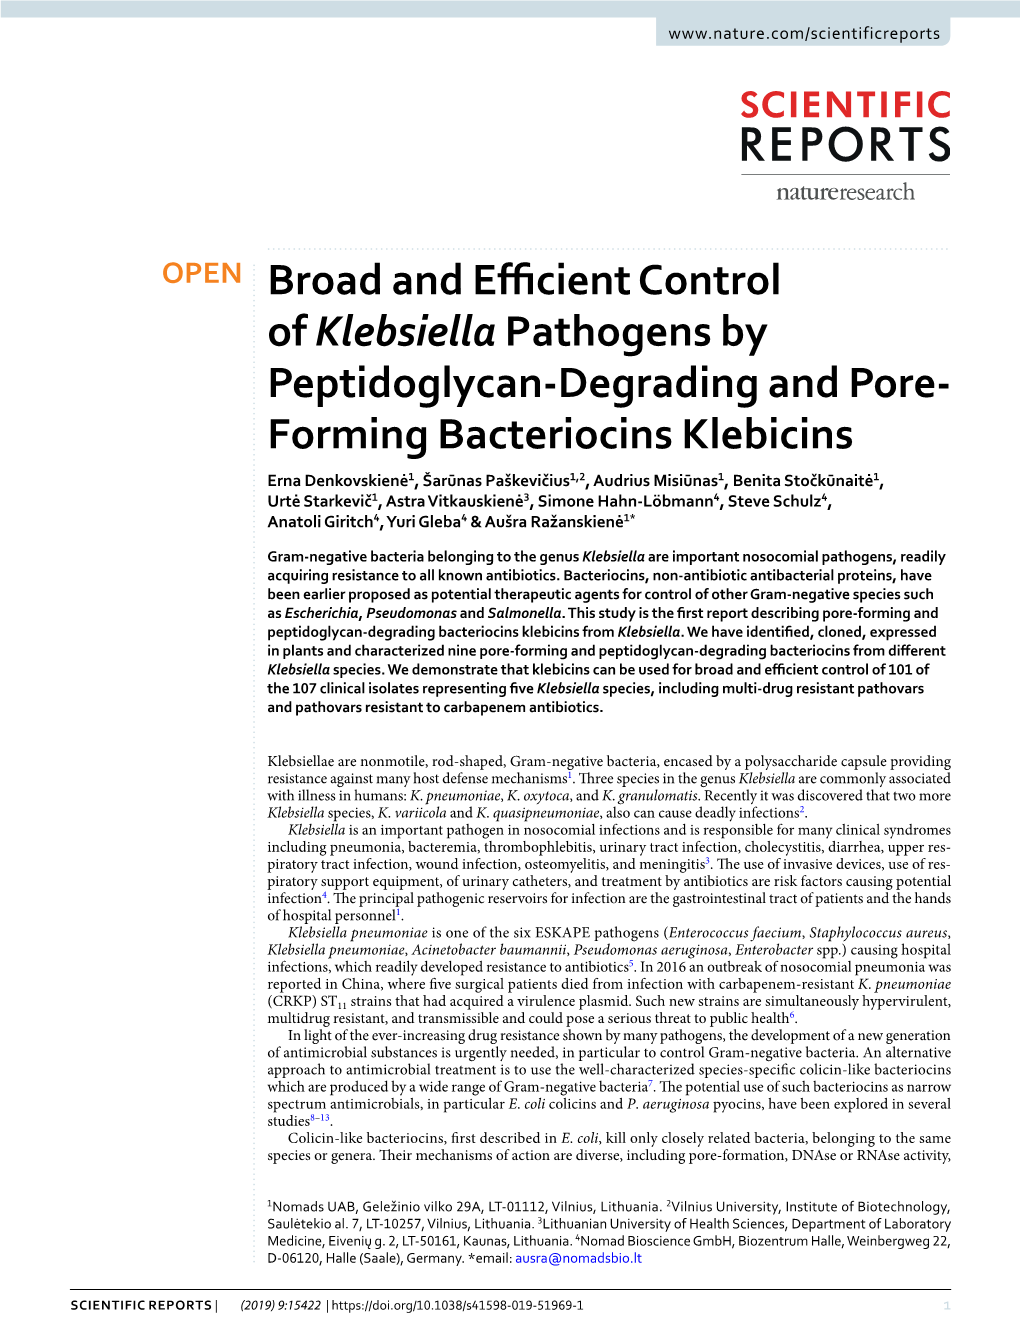 Broad and Efficient Control of Klebsiella Pathogens By